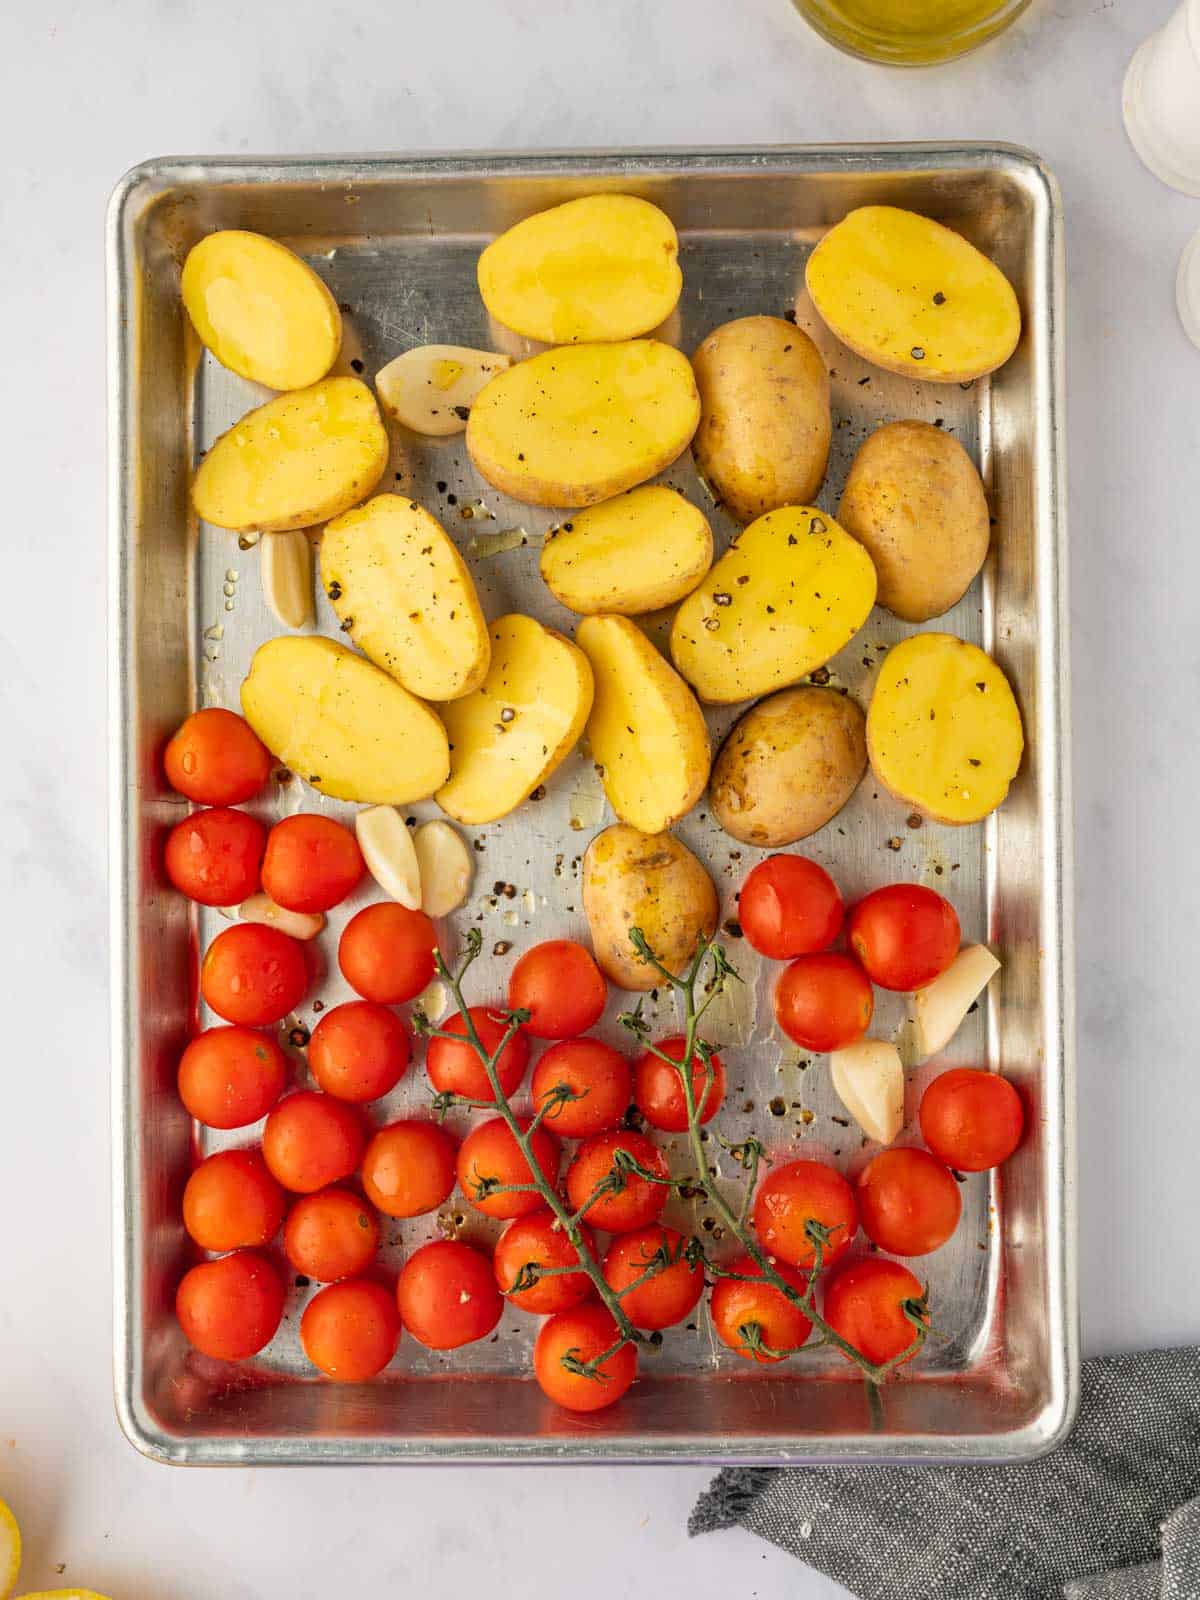 Potatoes and tomatoes on a tray.